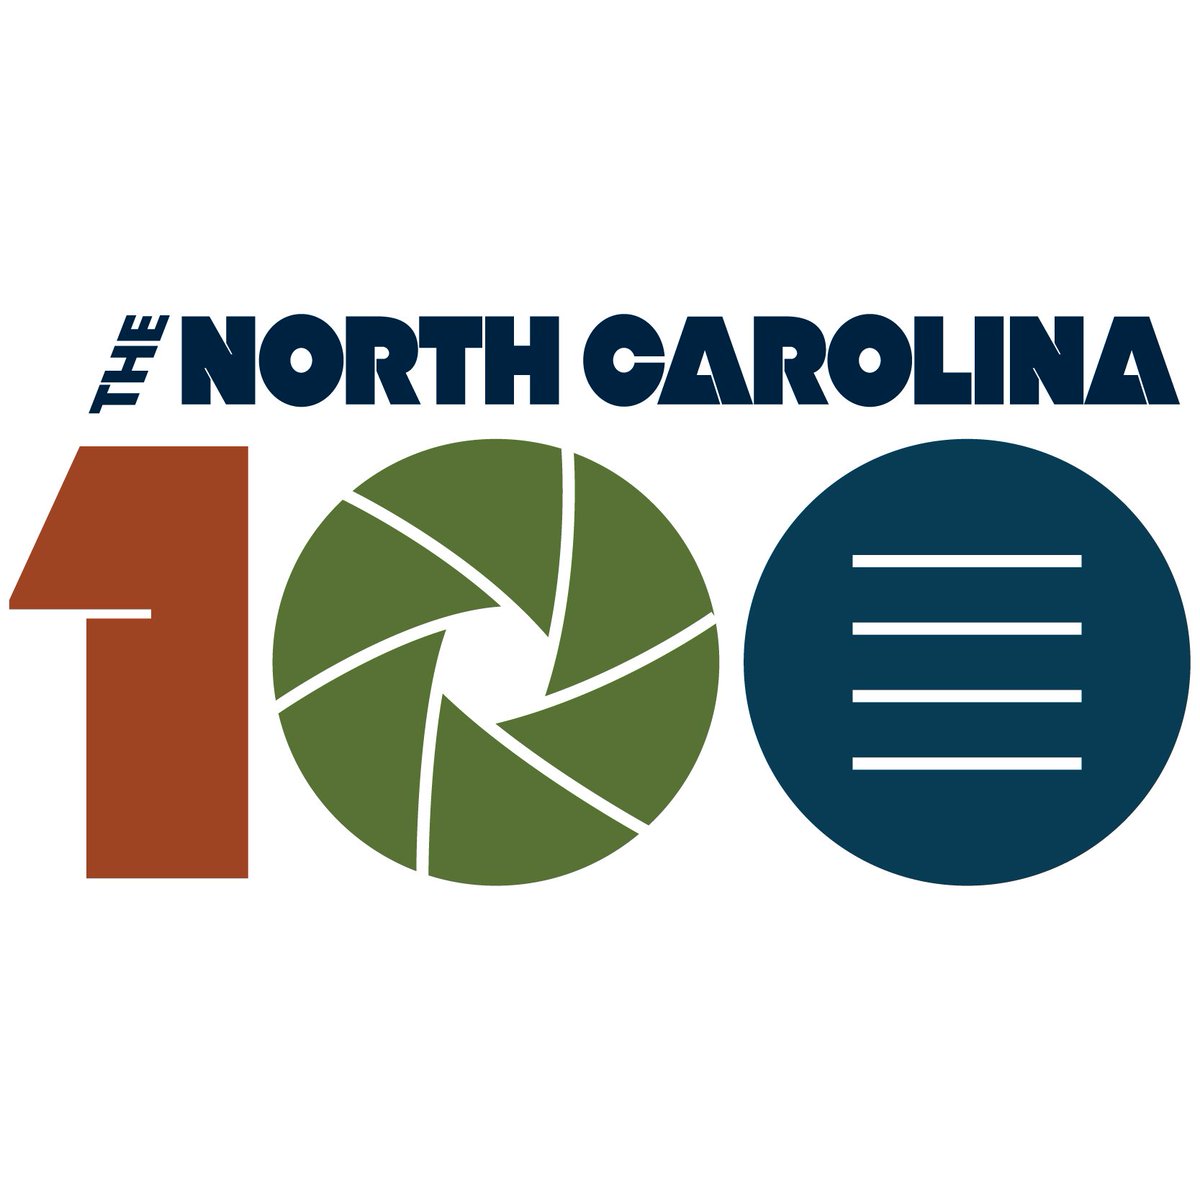 Read our latest issue: #NC's #LaborMarket, #ClearingClutter & @RYWRaleigh Concert! Subscribe for free at thenorthcarolina100.com